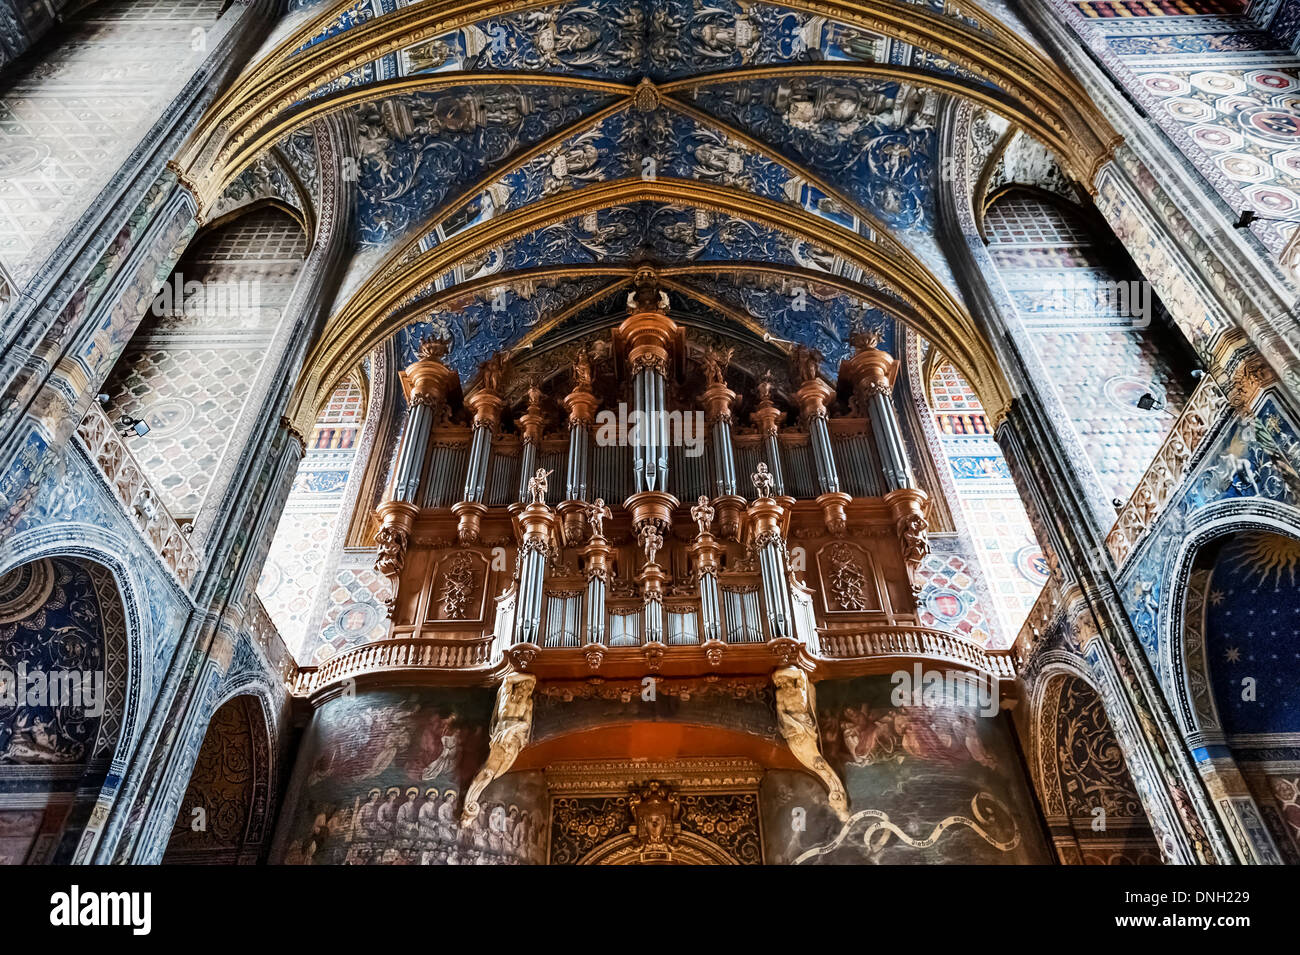 Europe, France, Tarn, Albi. Episcopal city, classified as UNESCO World Heritage. Cathedral Sainte-Cecile. The great organ. Stock Photo